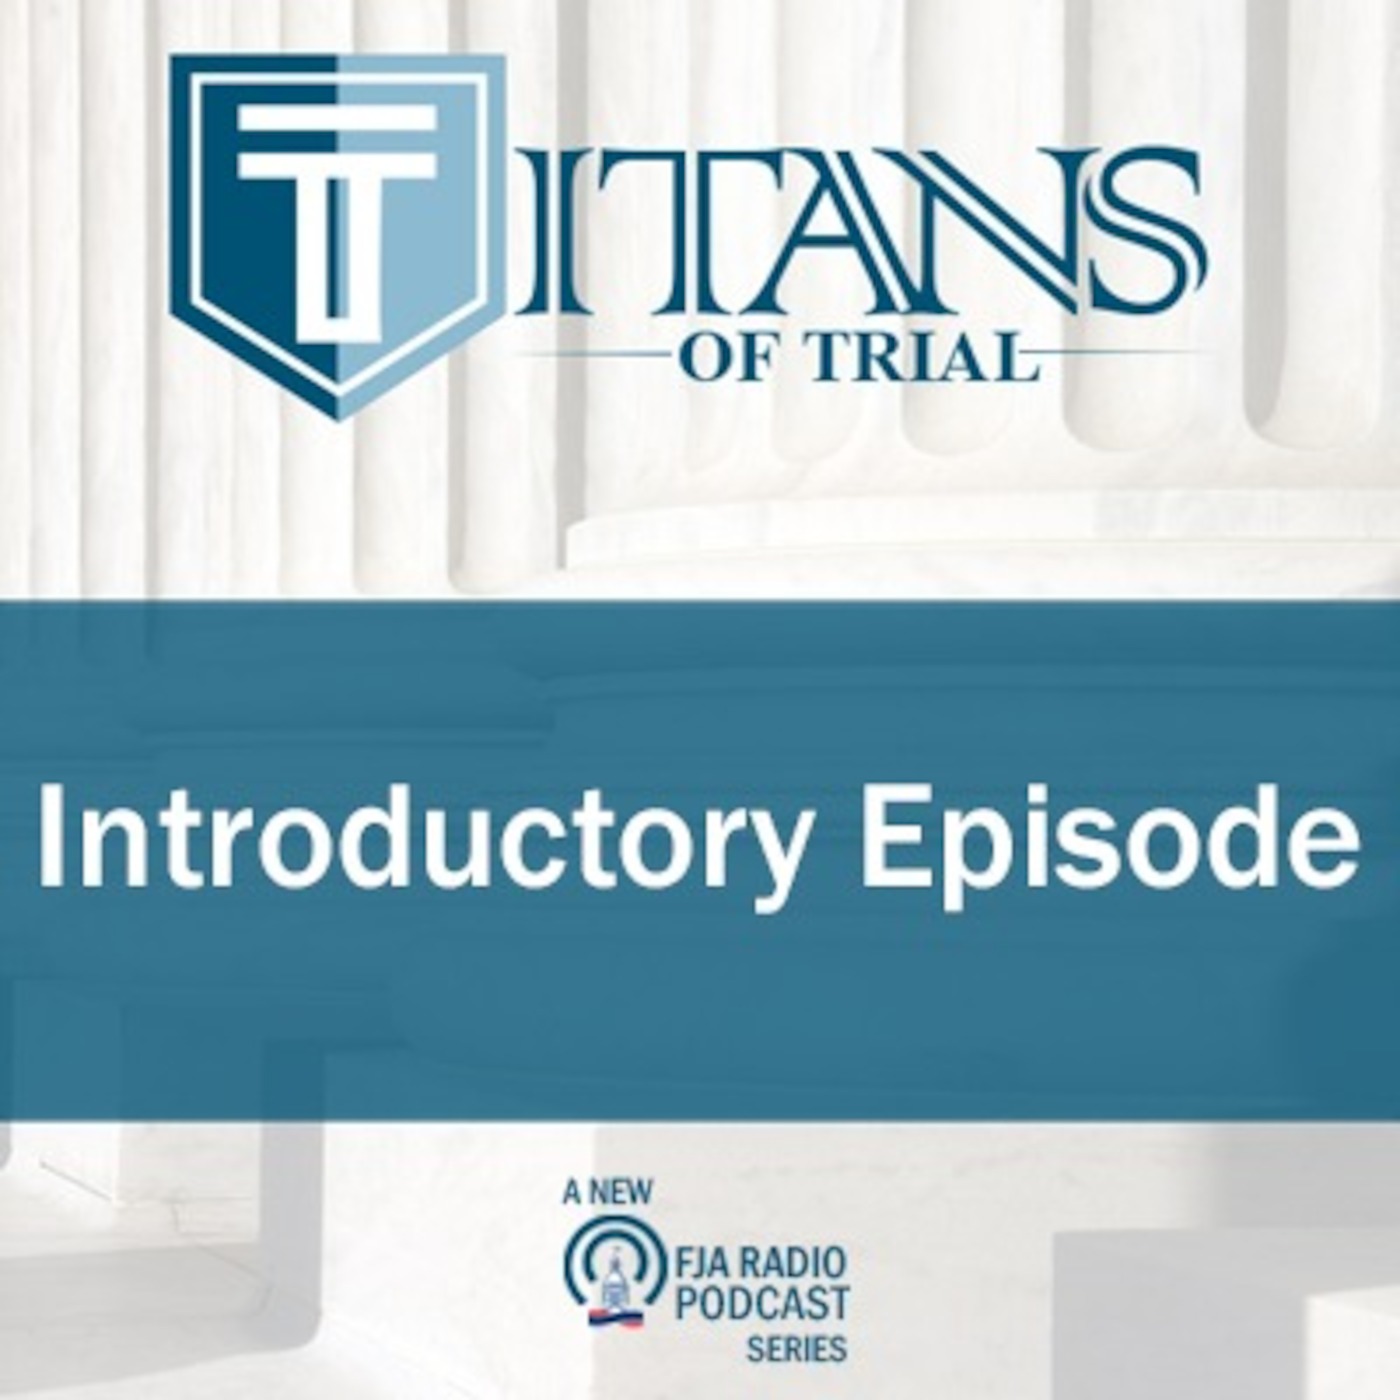 Titans of Trial - Introducing the Titans of Trial